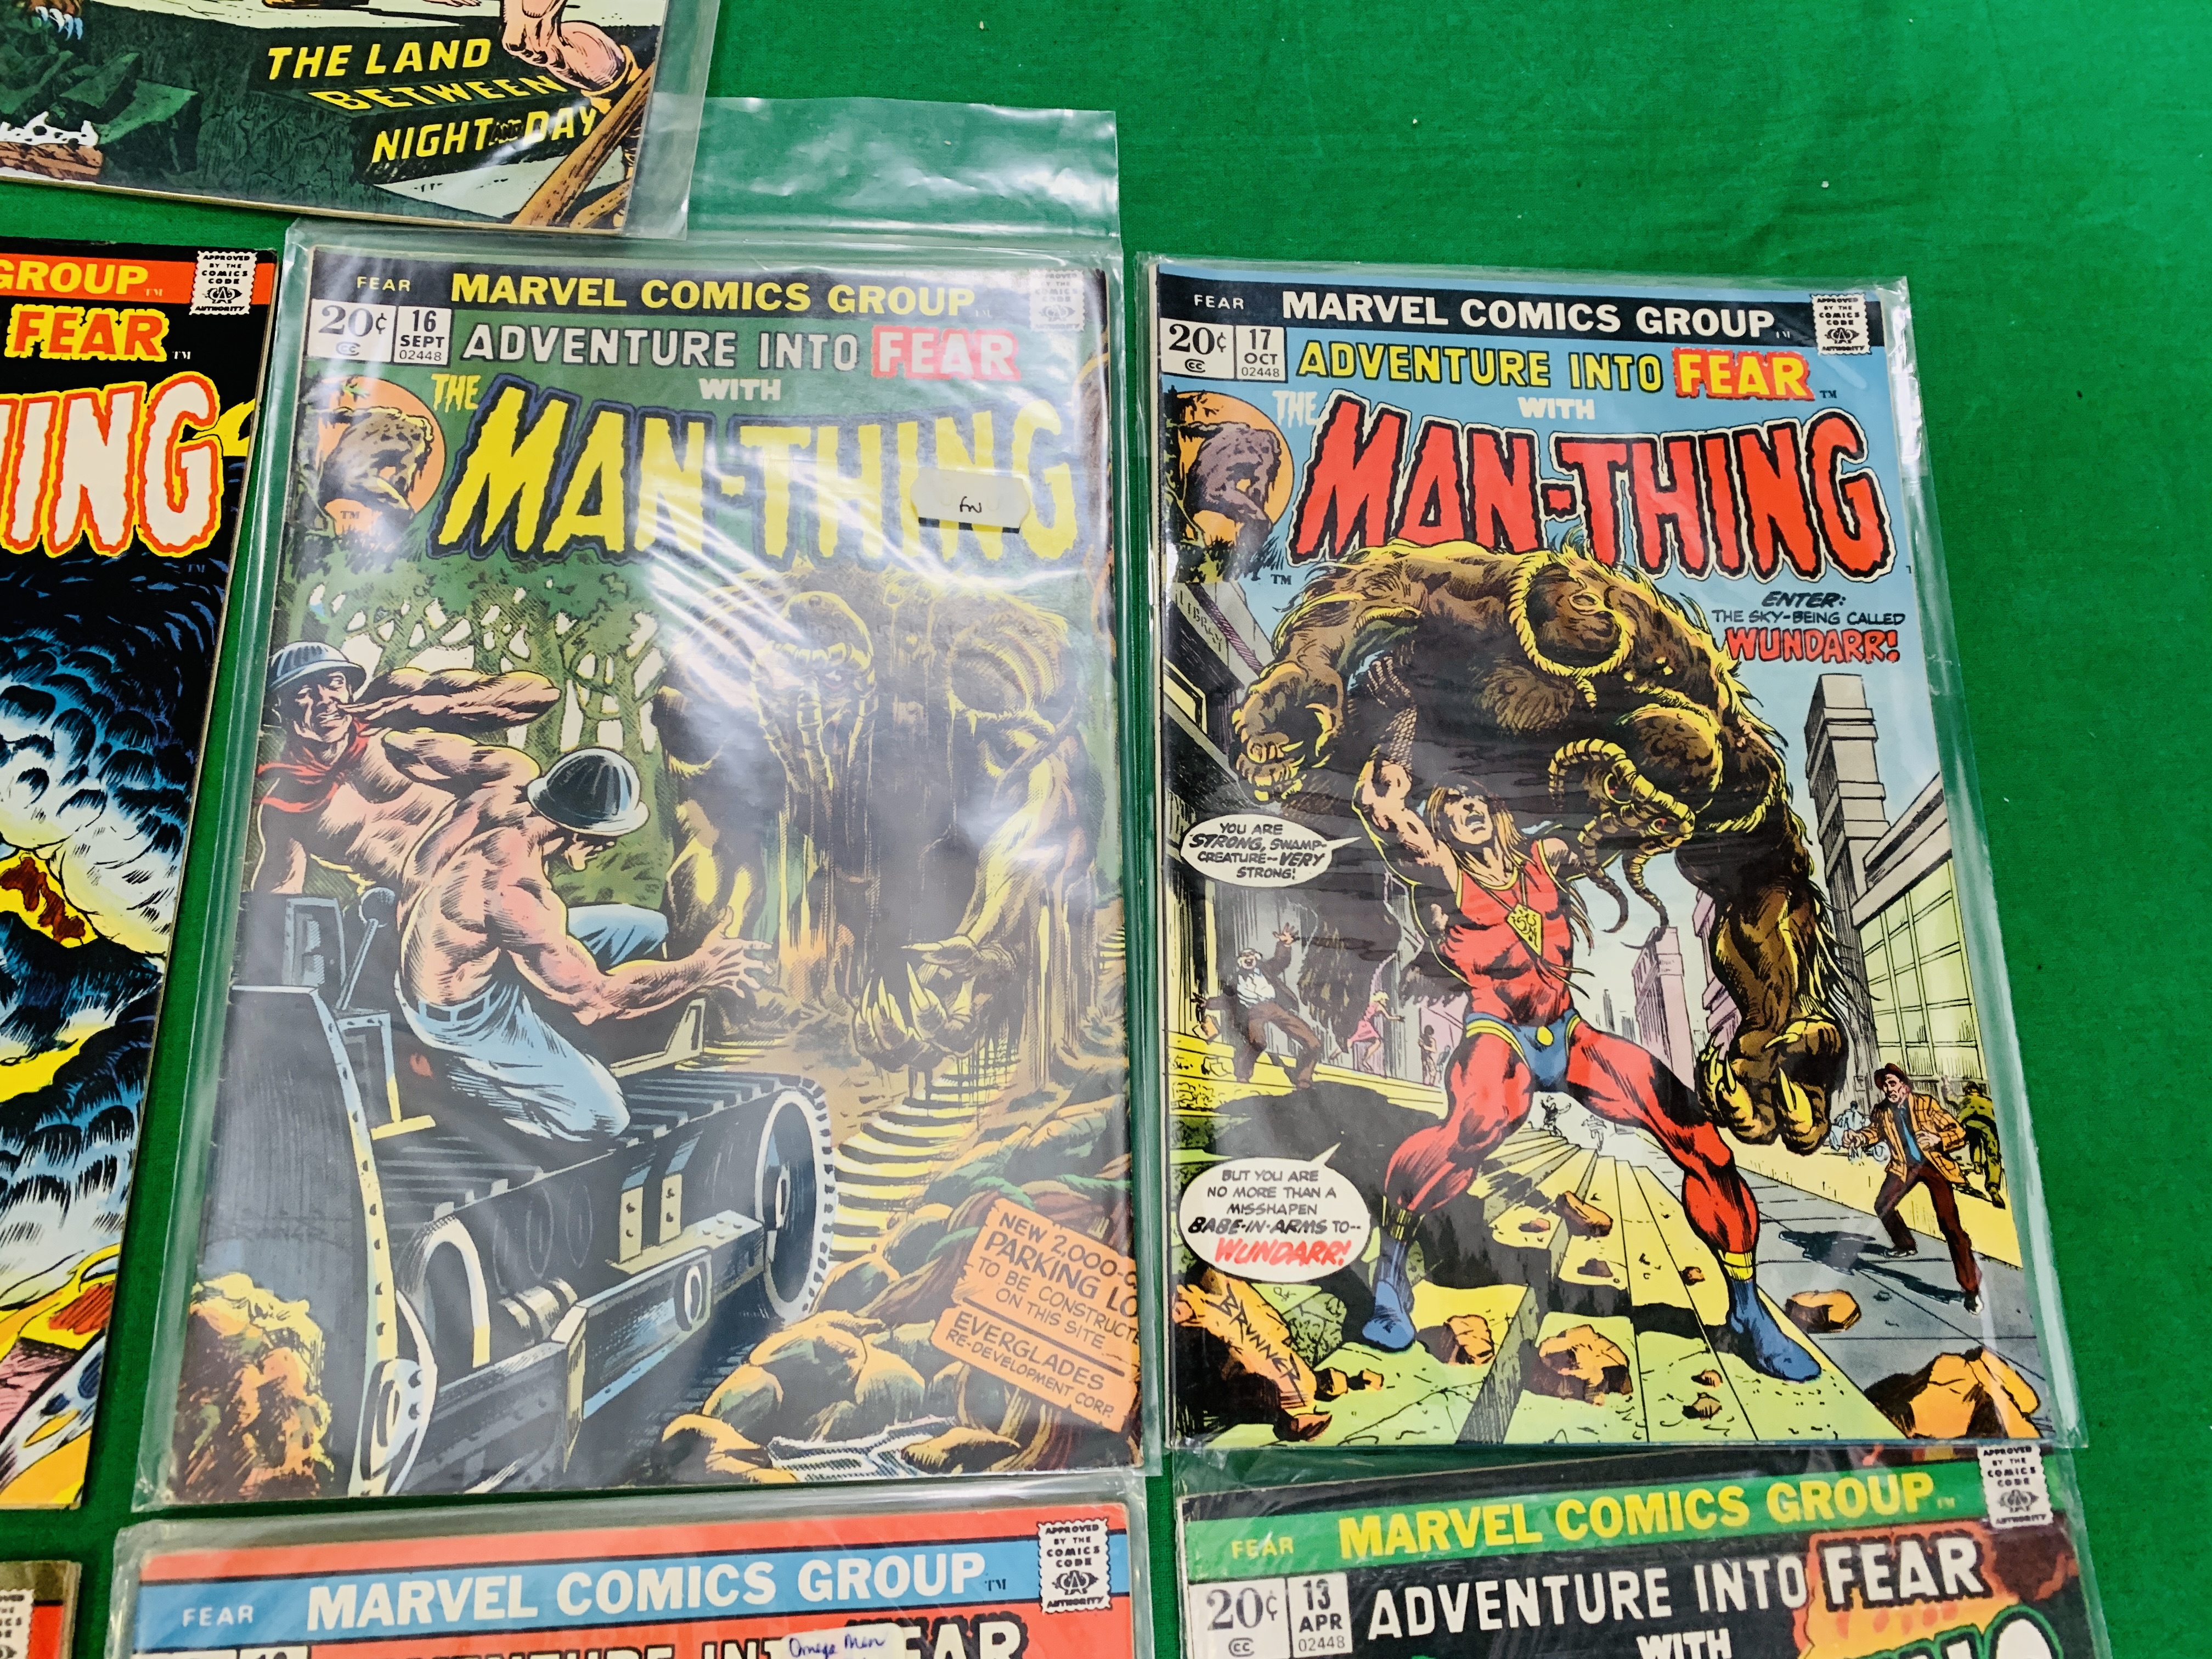 MARVEL COMICS ADVENTURE INTO FEAR WITH MAN-THING NO. 10 - 17, 19, FROM 1973. NO 19. - Image 5 of 6